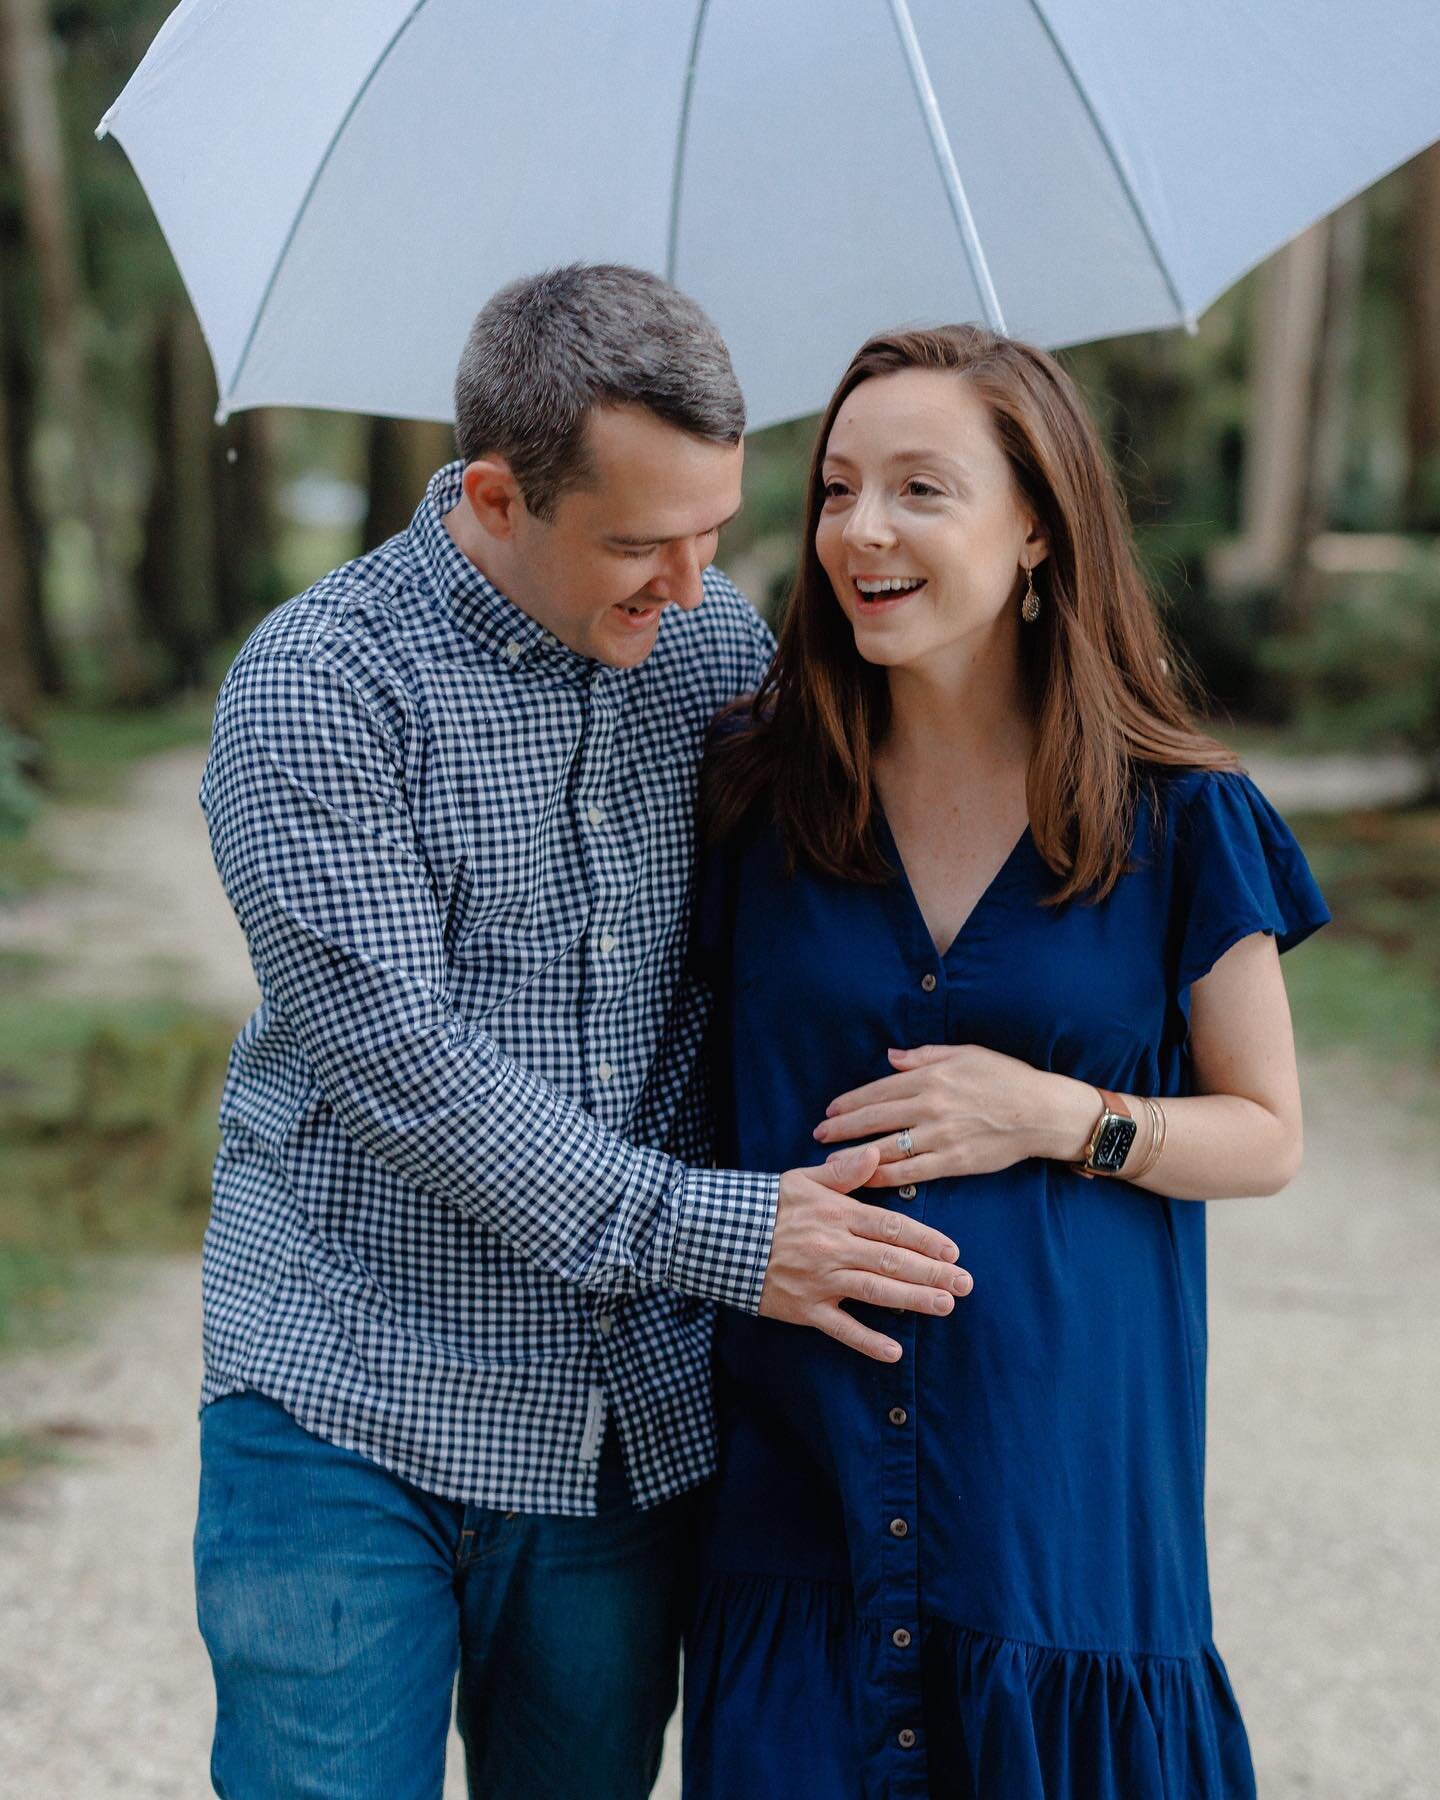 October is finally here! For our family that means we&rsquo;ll be meeting our first baby any day now! 

To my husband, Joseph Edward &mdash;
I cannot wait to watch you with our little boy! Cooper is already so lucky to have you as his Dad. I&rsquo;m 